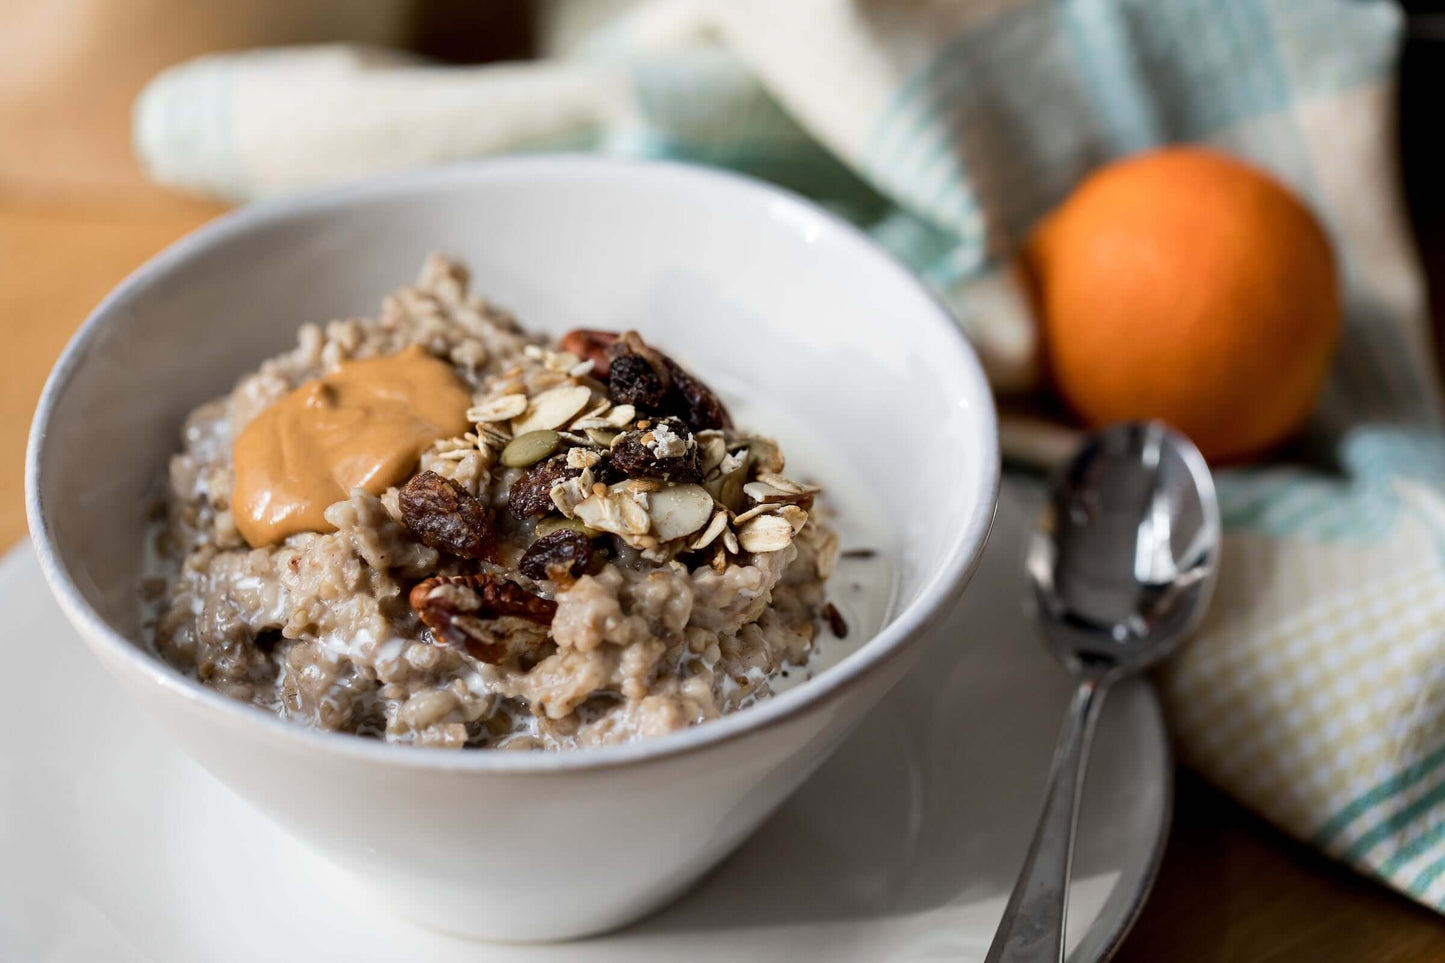 Oatmeal topped with Michele's Toasted Muesli